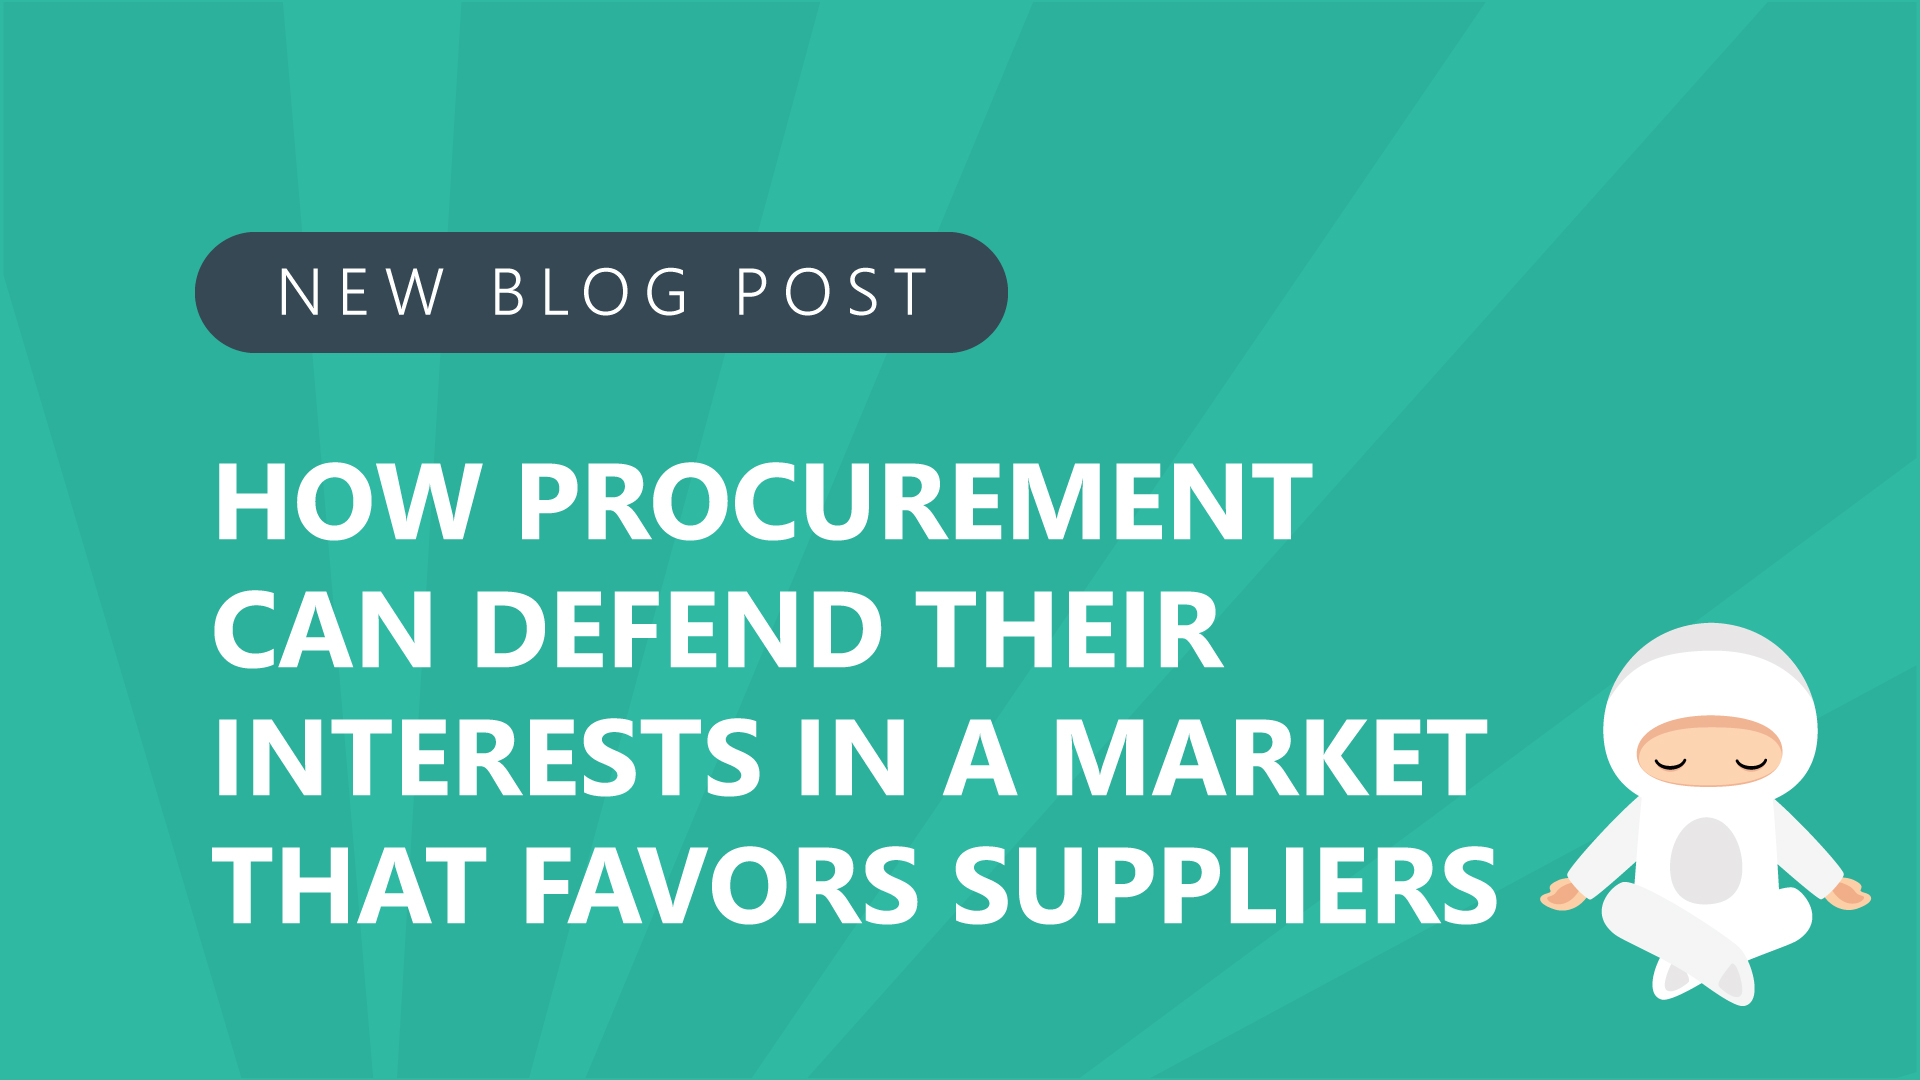 How-Procurement-Can-Defend-Their-Interests-in-a-Market-that-Favors-Suppliers.jpg